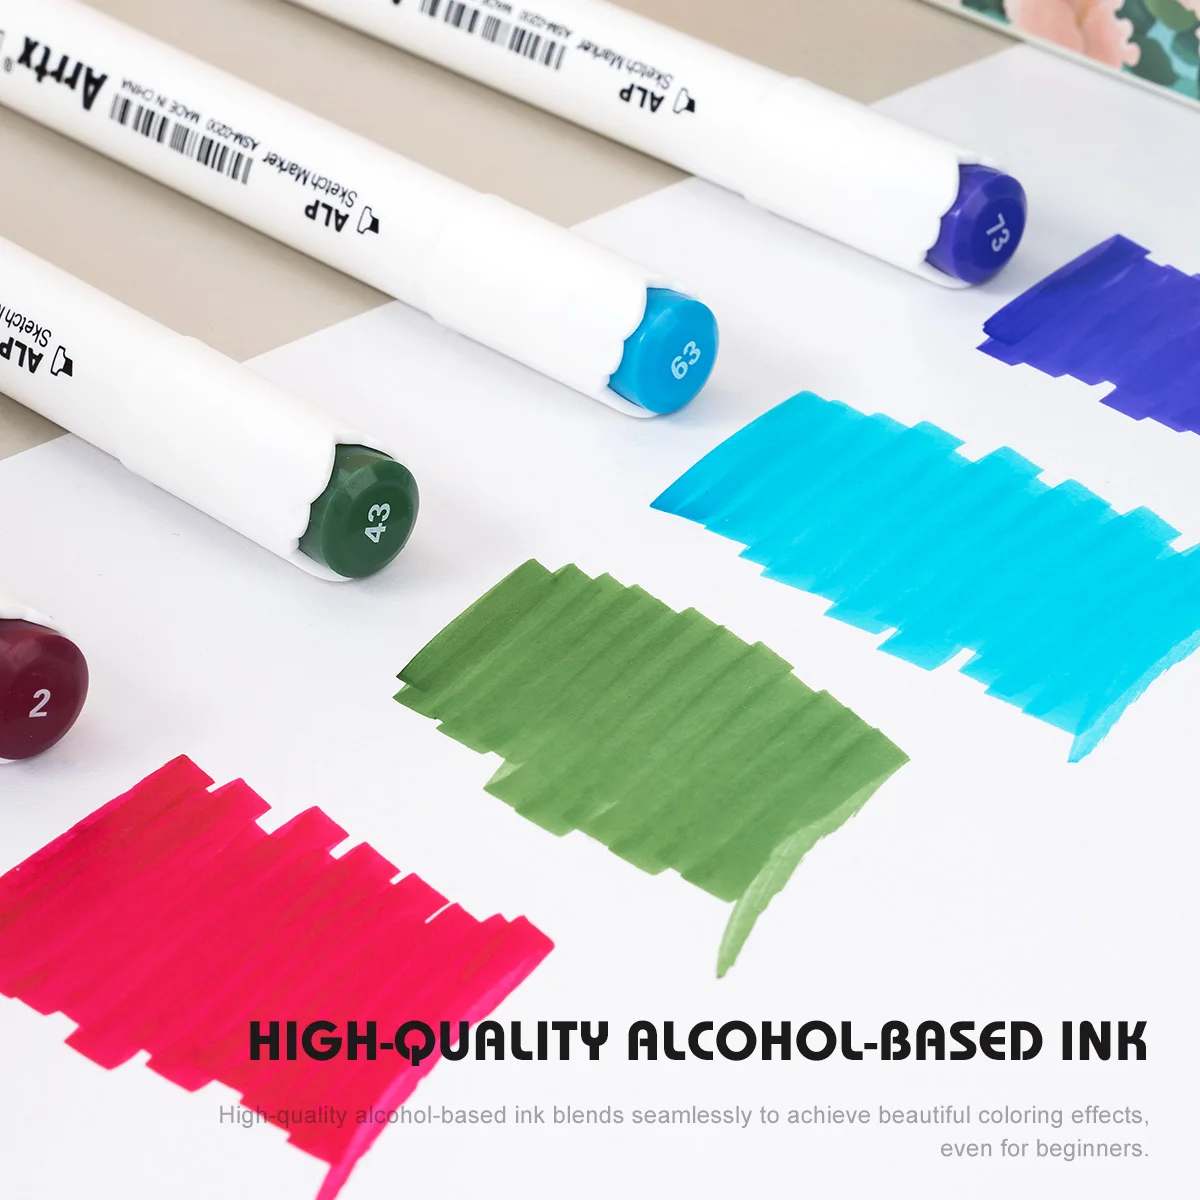 Arrtx OROS 40 Pastel Colors Brush Markers Set Alcohol-based Stable and  Durable Ink Permanent for Anime Illustration Design